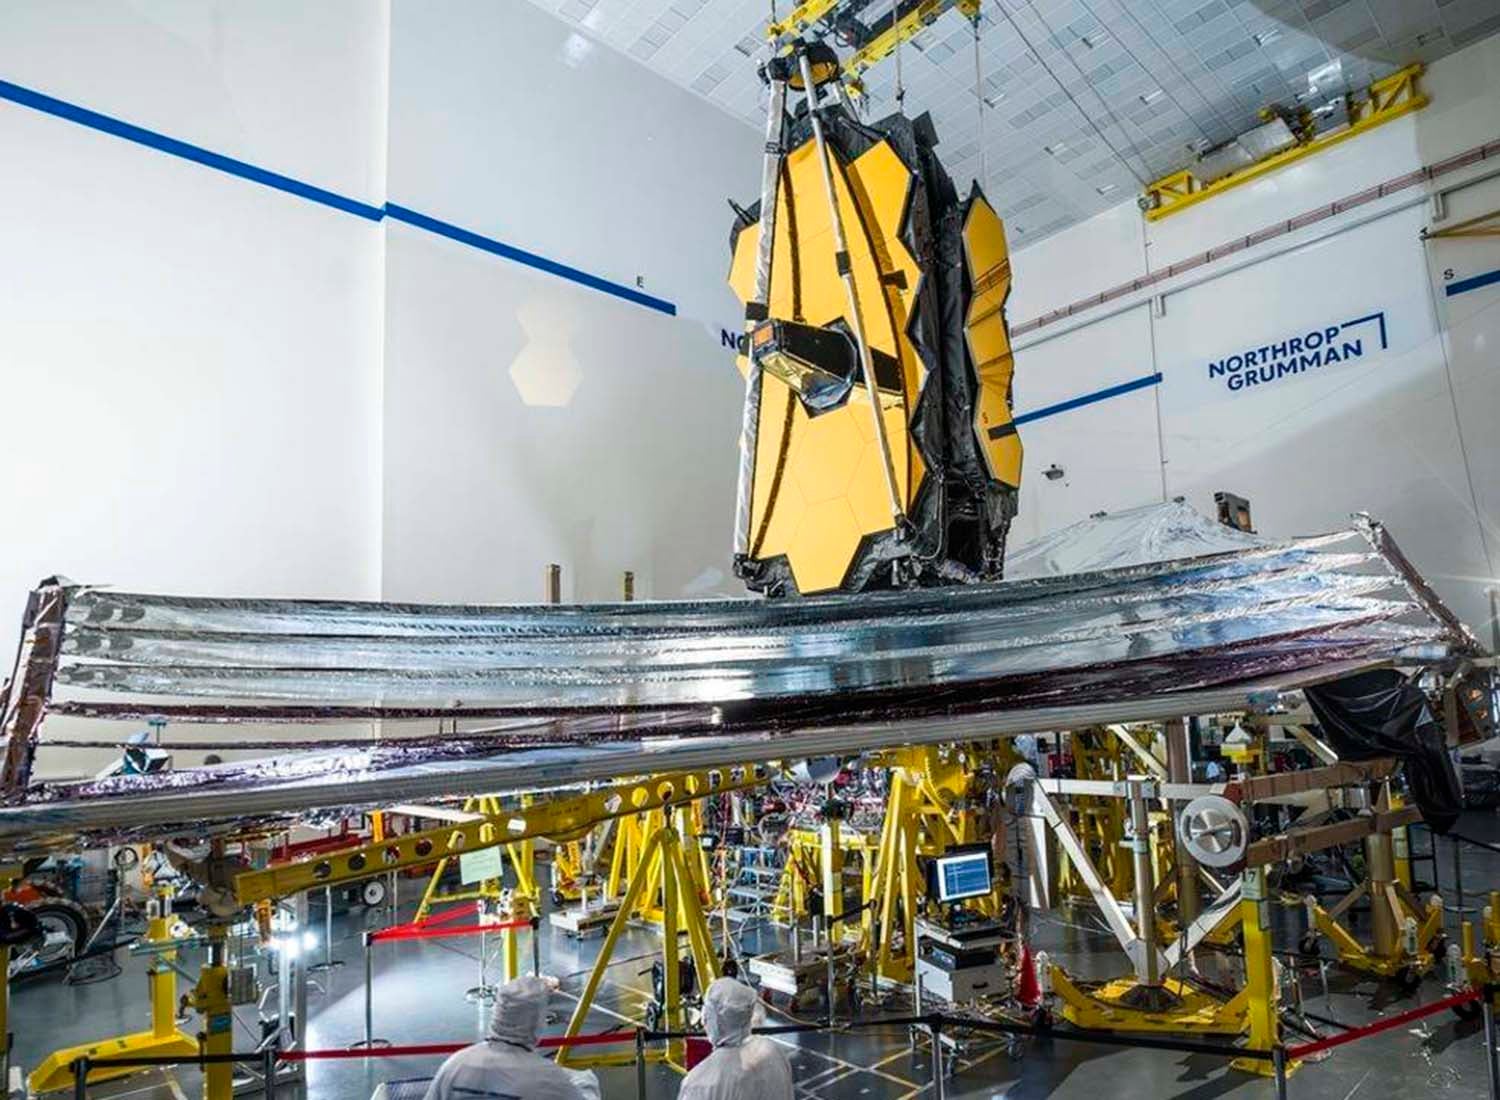 First Images from James Webb Telescope Arriving Soon